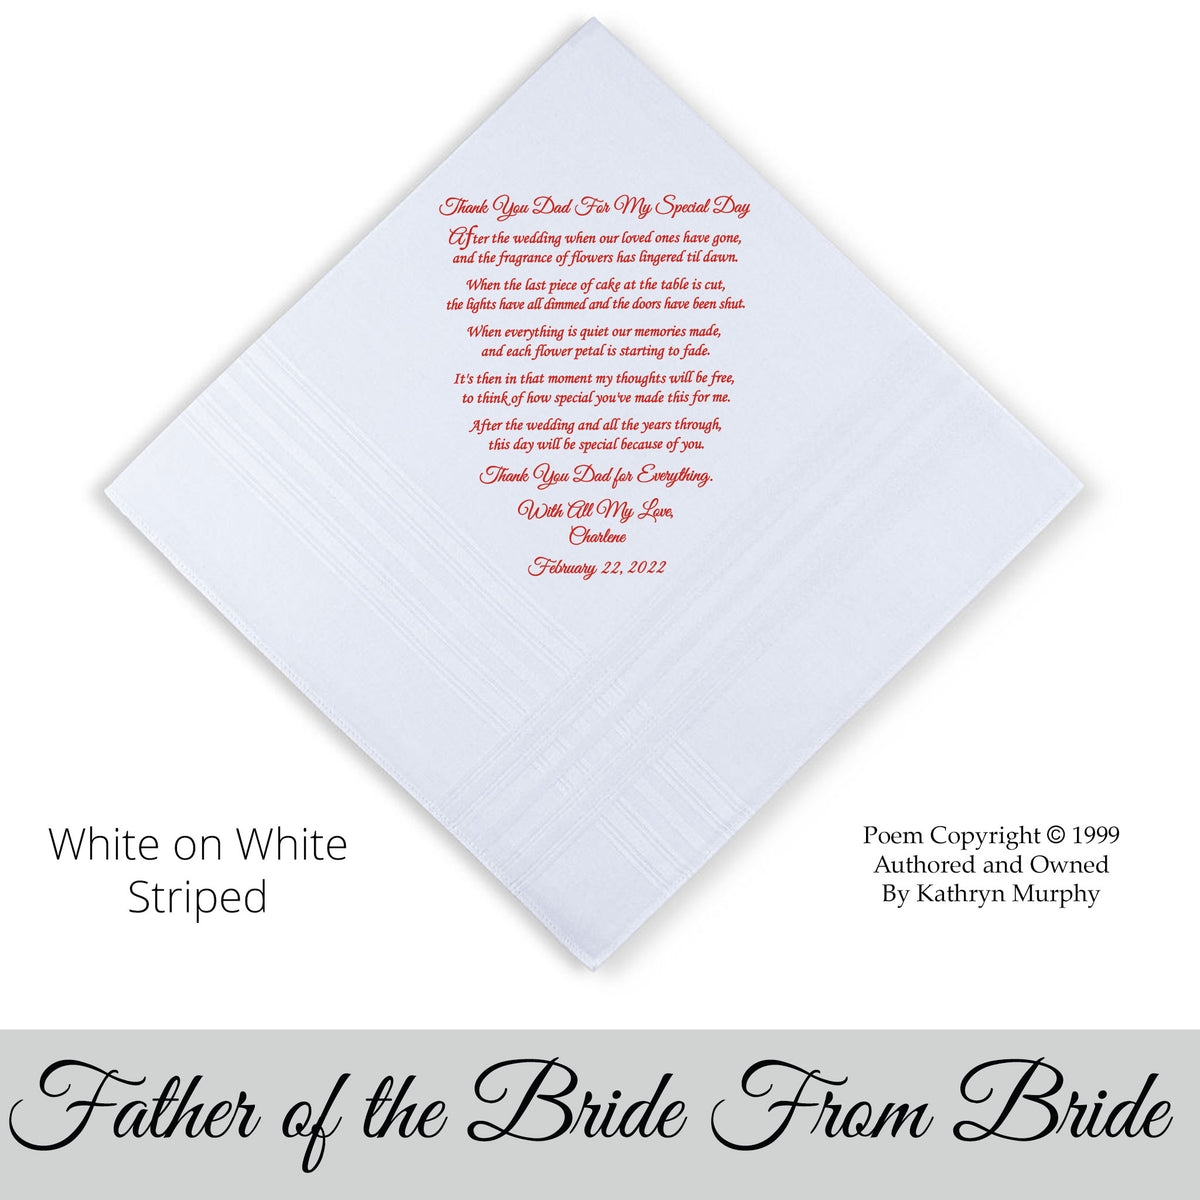 For the father of the bride wedding hankie with poem &quot;Thank you for my special day&quot;